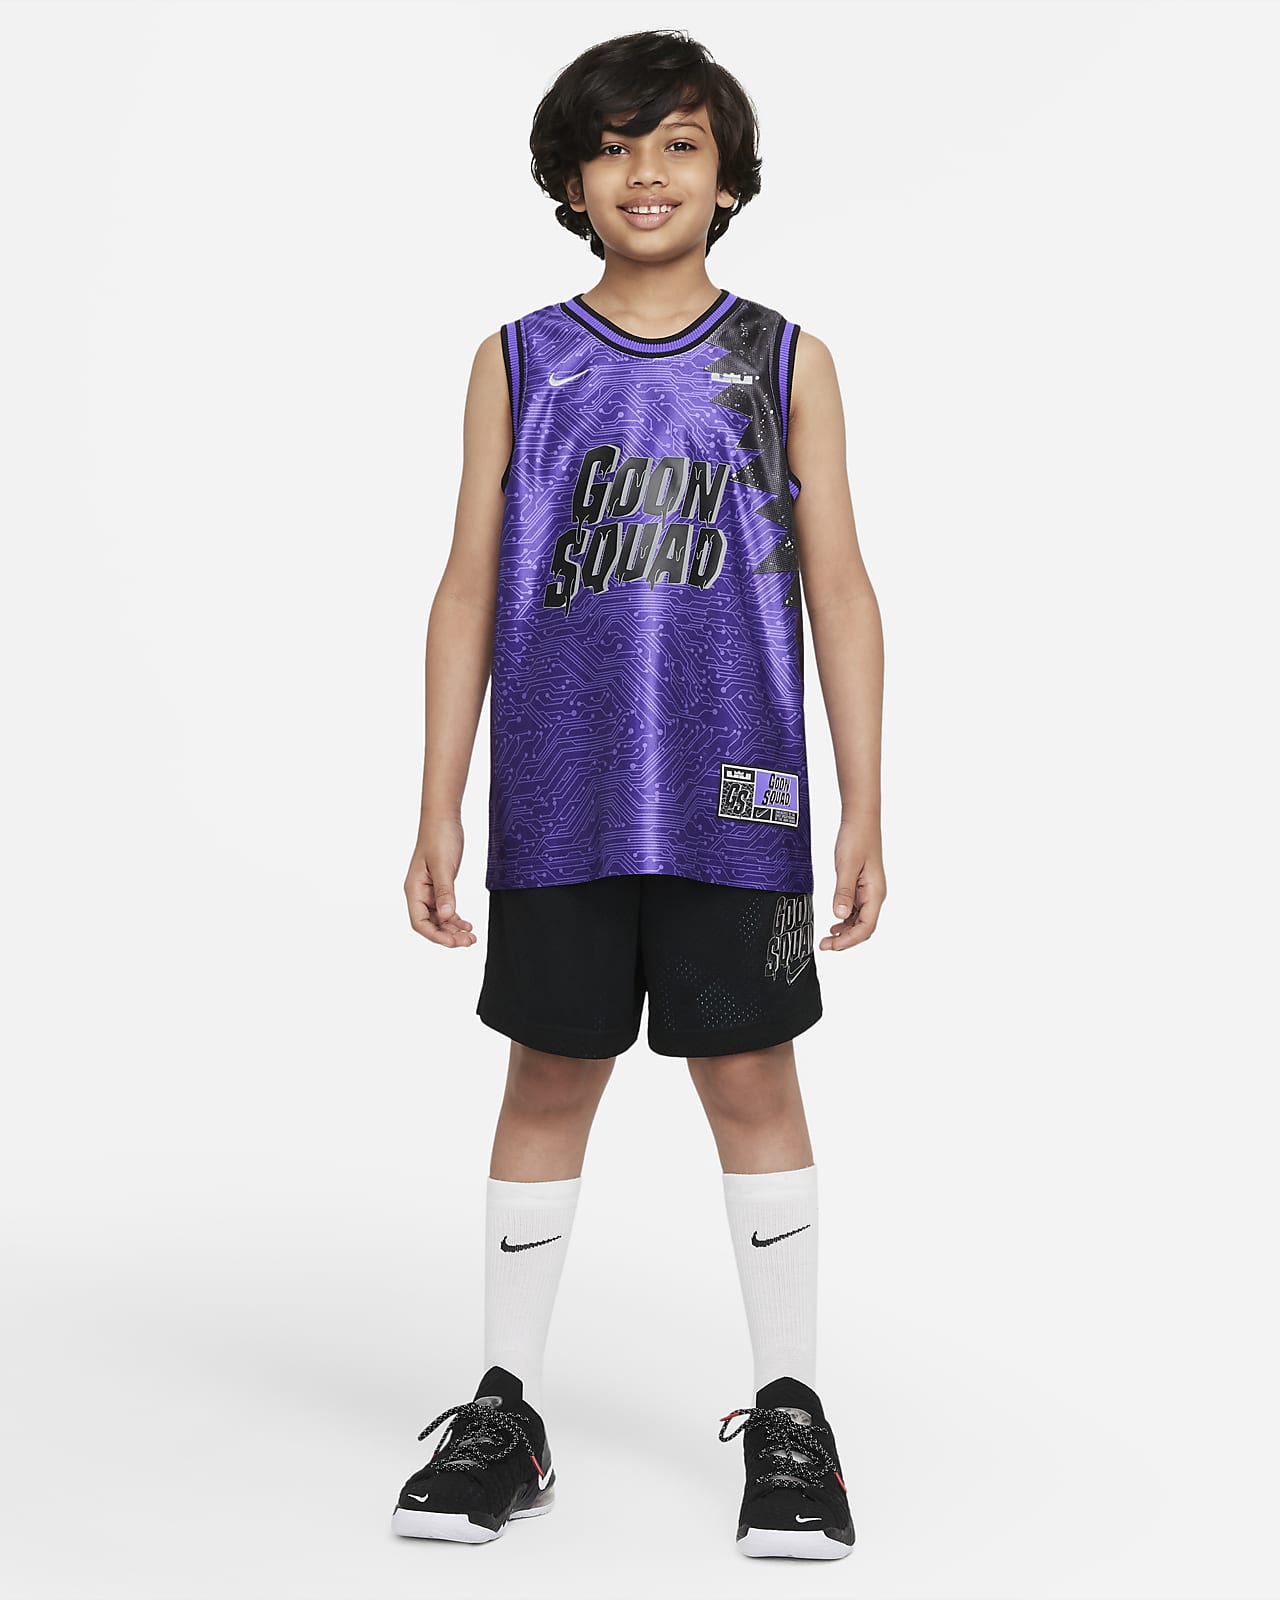 Space-Jam Basketball Jersey Tune-Squad #6 James Top Shorts Goon Squad ...